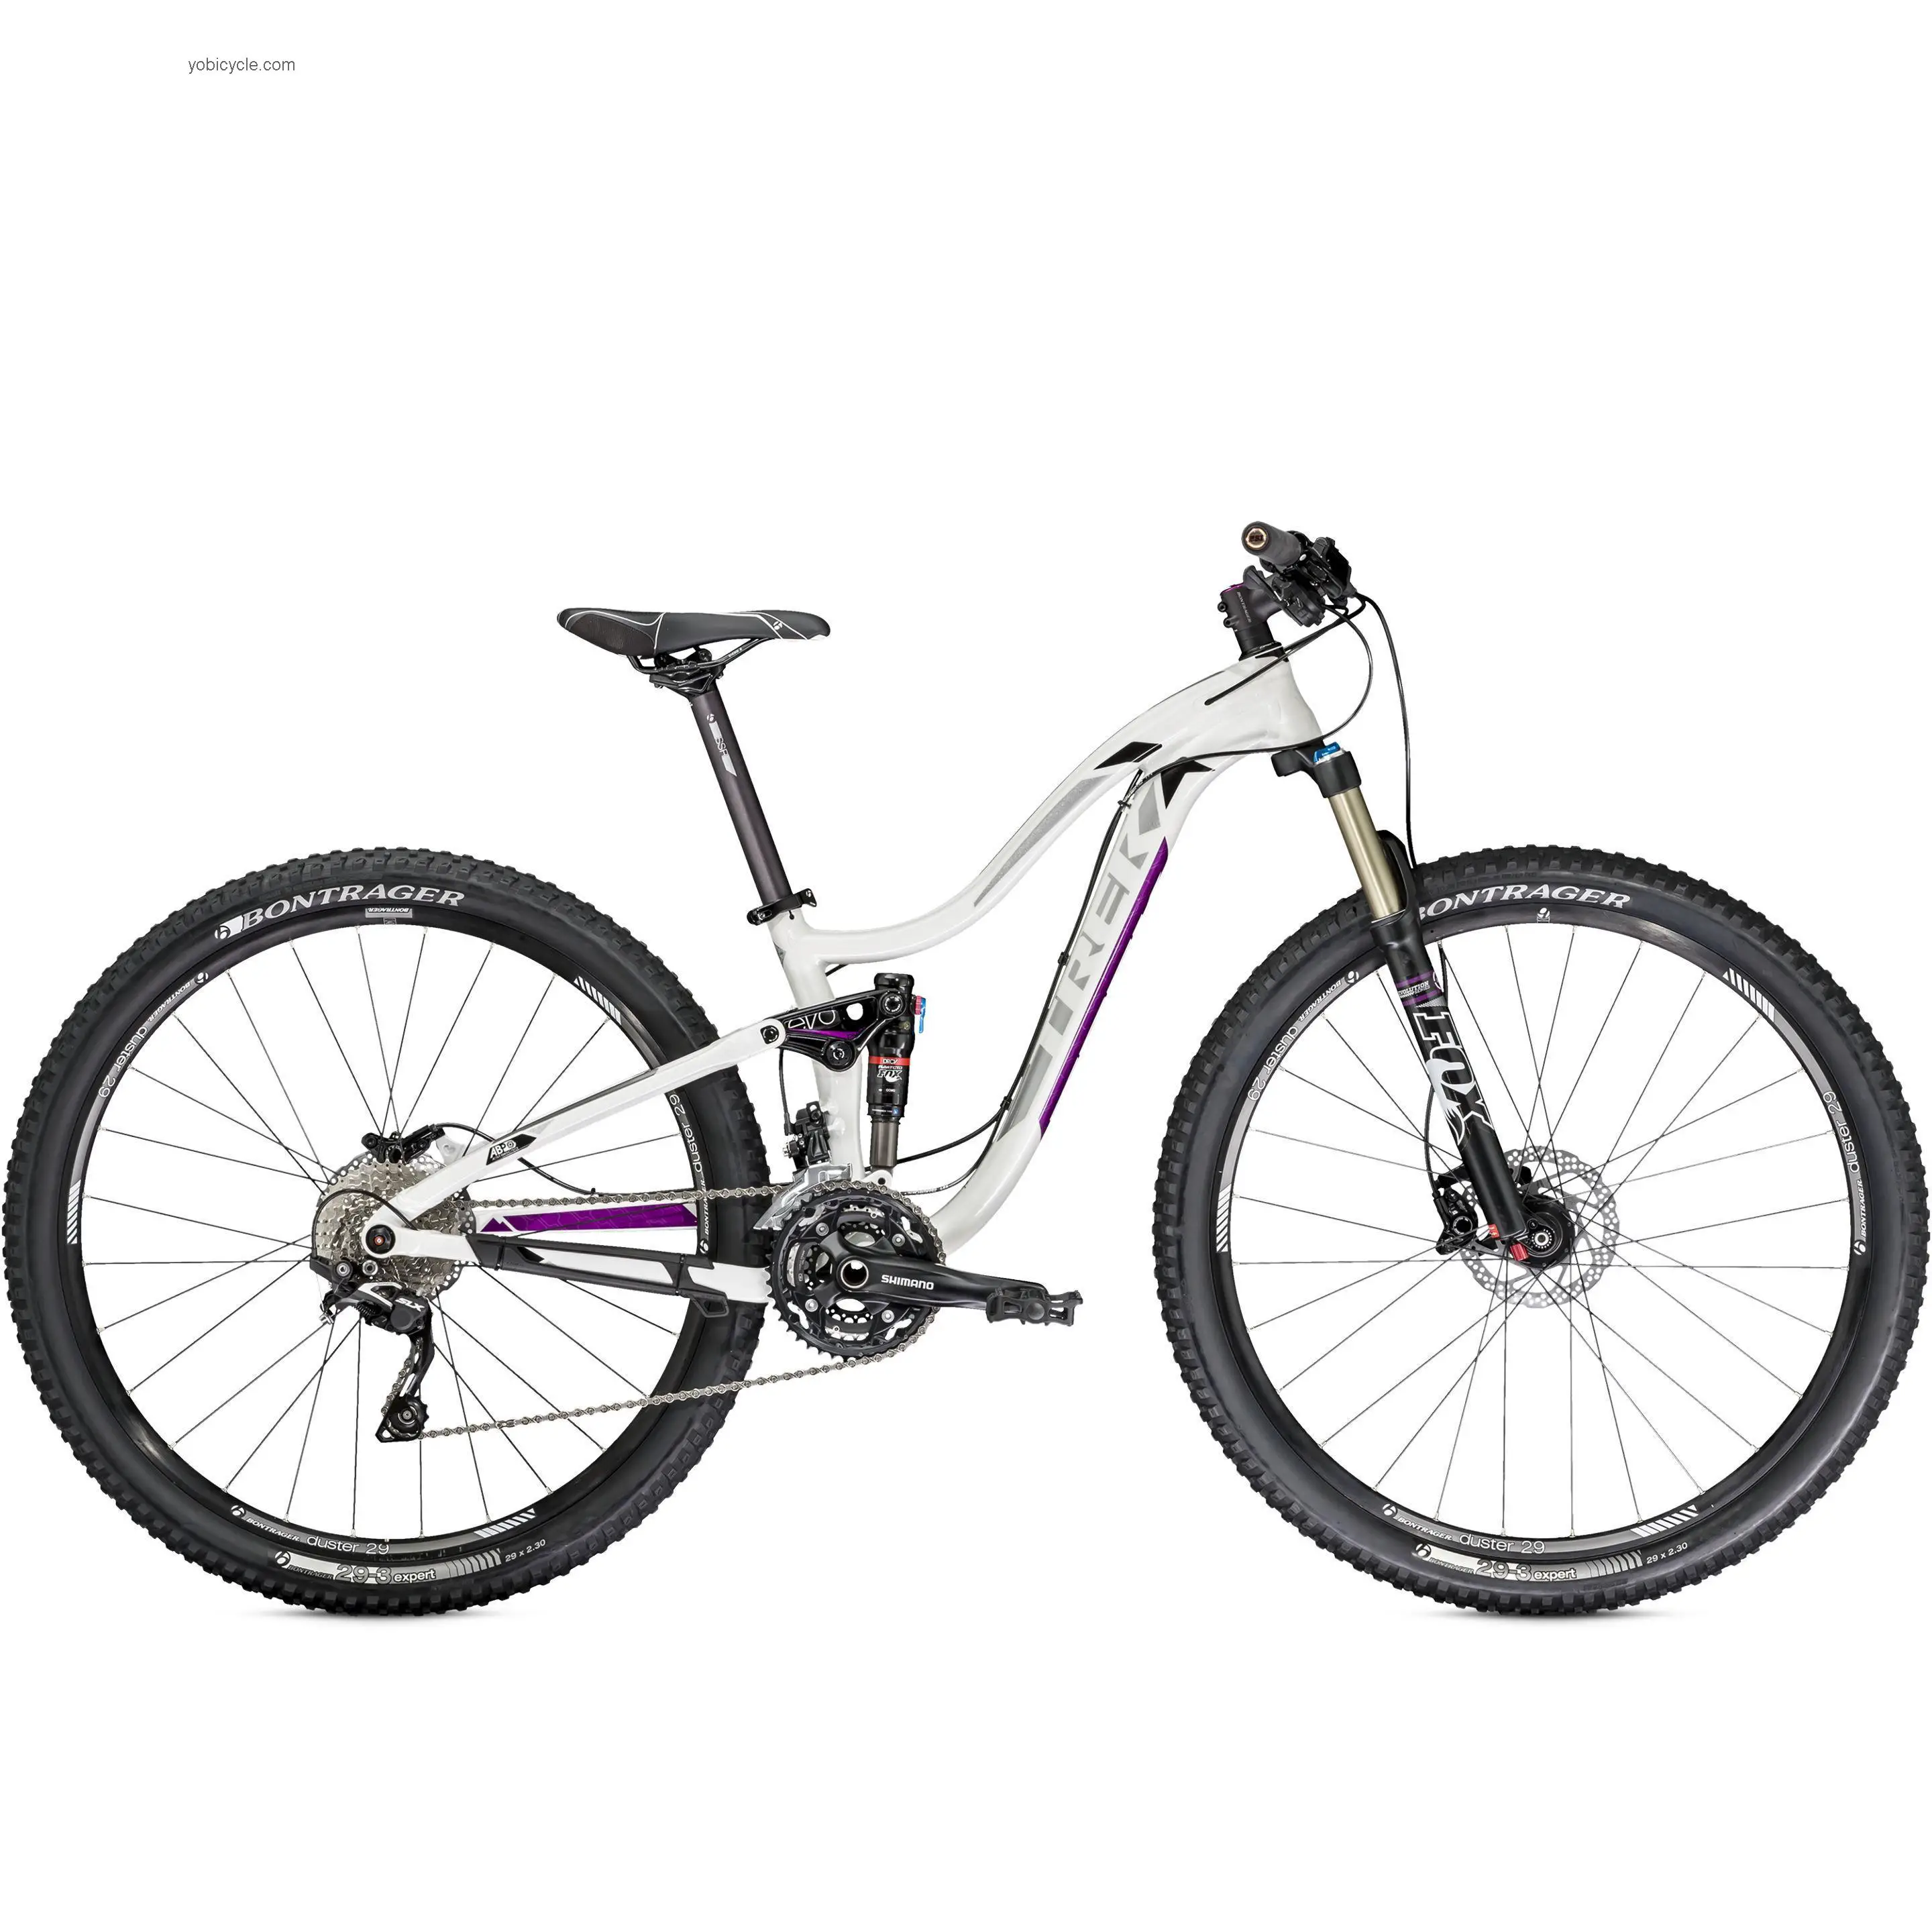 Trek Lush S 29 competitors and comparison tool online specs and performance